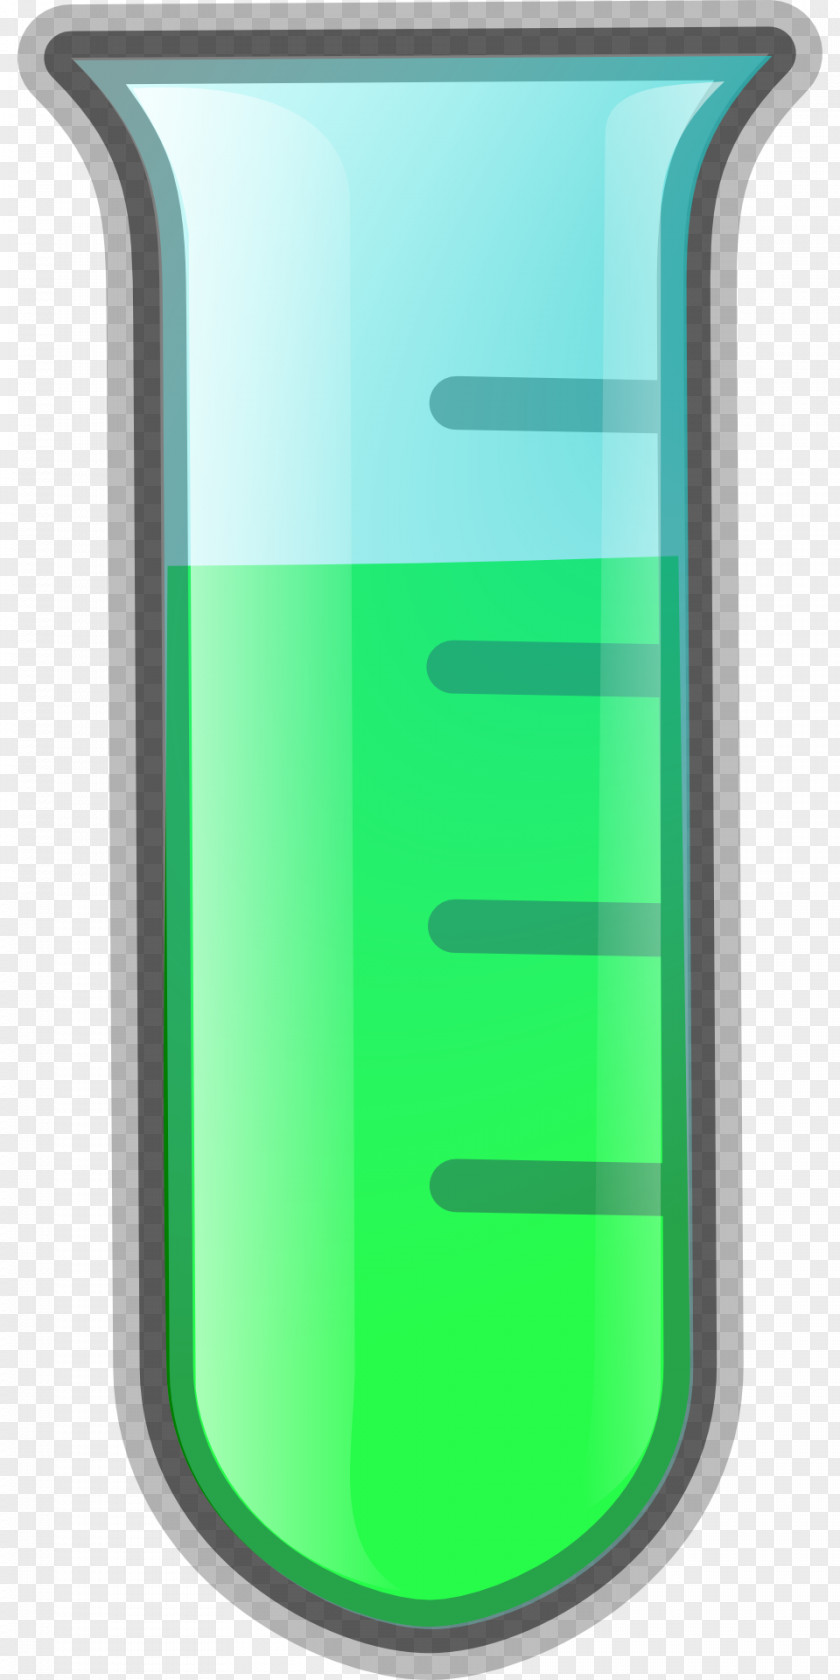 Container Test Tubes Laboratory Chemistry Clip Art PNG